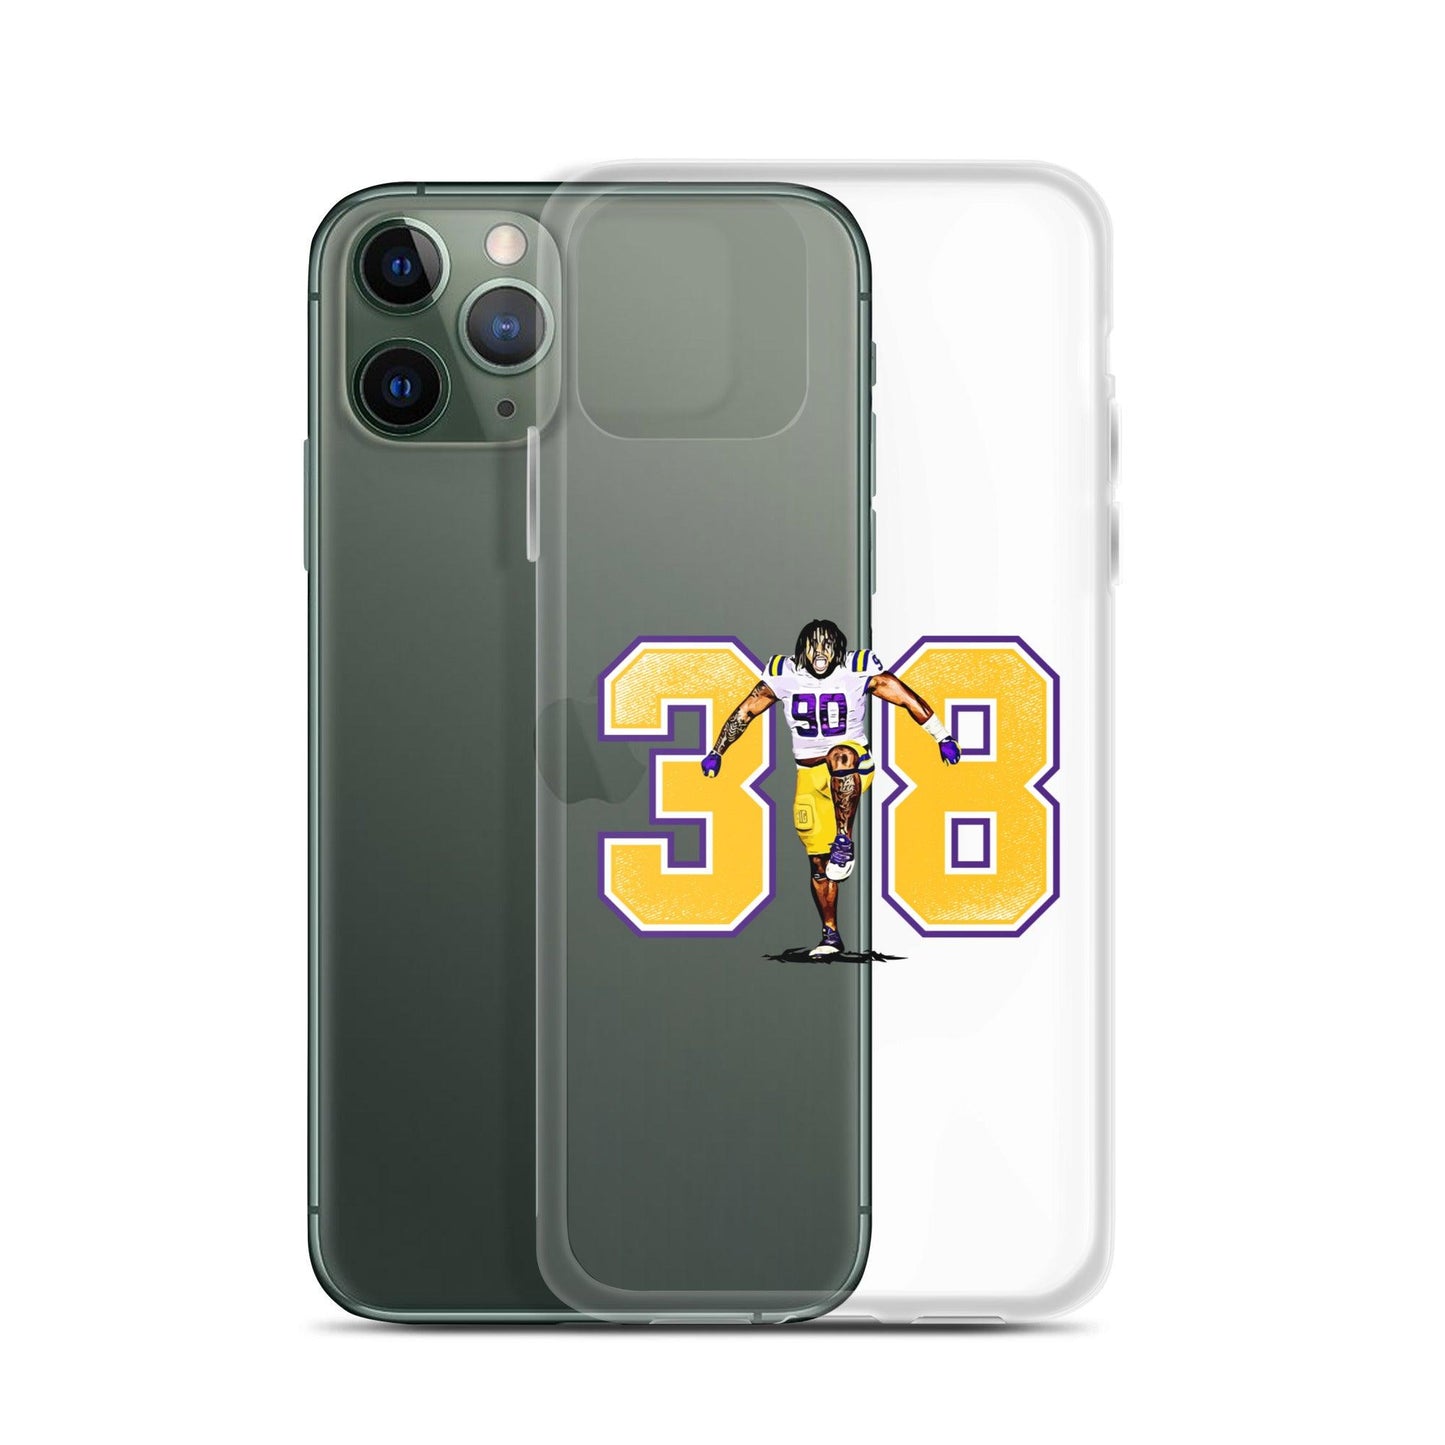 Jacobian Guillory "308" iPhone Case - Fan Arch